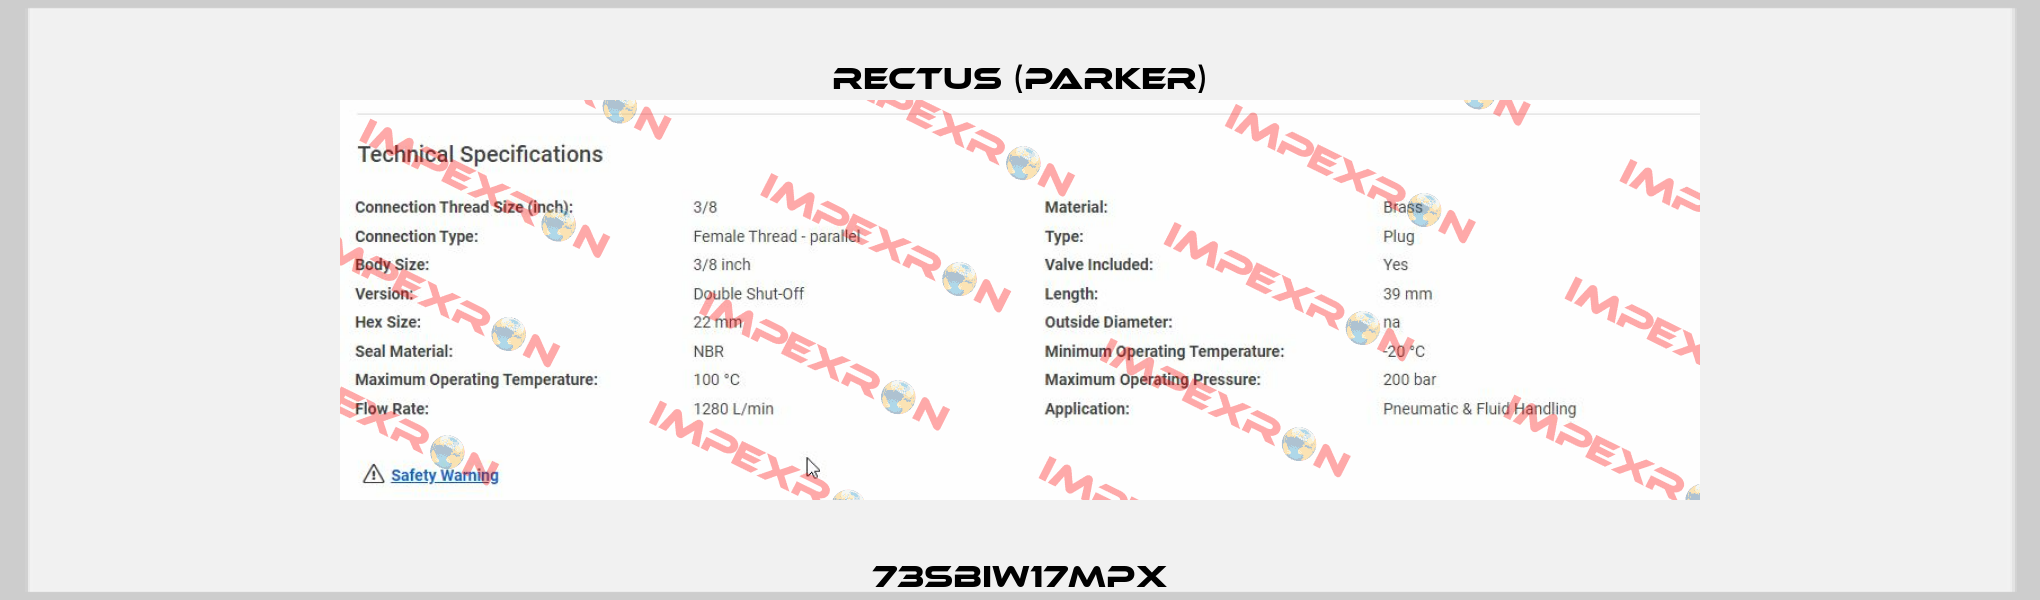 73SBIW17MPX Rectus (Parker)